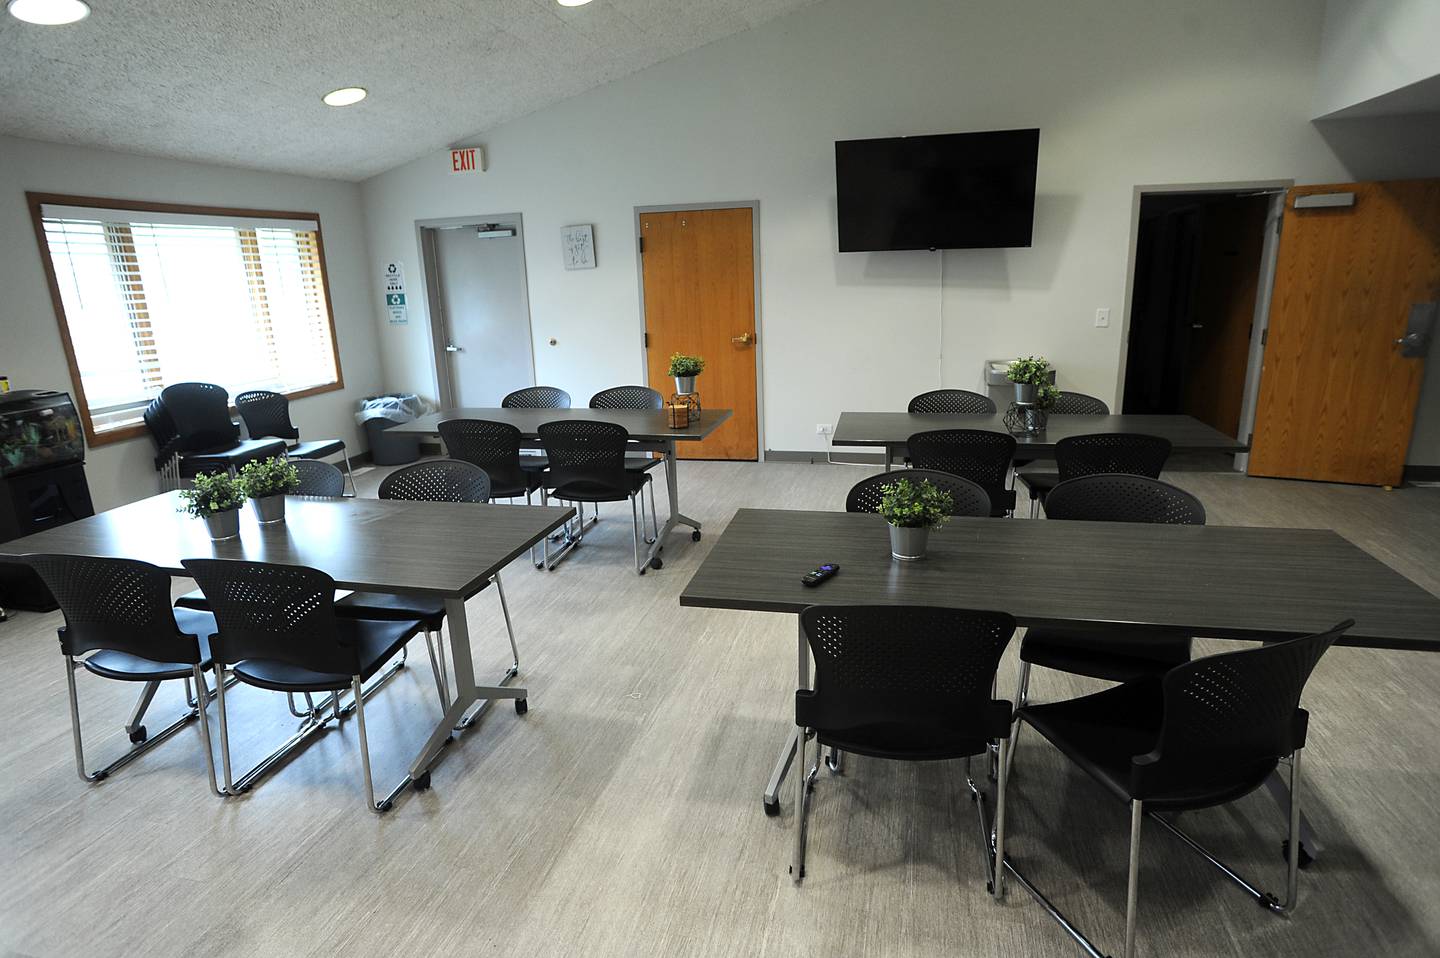 The dining area inside the New Directions Addiction Recovery facility at 14411 Kishwaukee Valley Road in Woodstock.  The nonprofit received almost $1 million in a grant from the county to open a new facility to further its addiction recovery efforts.